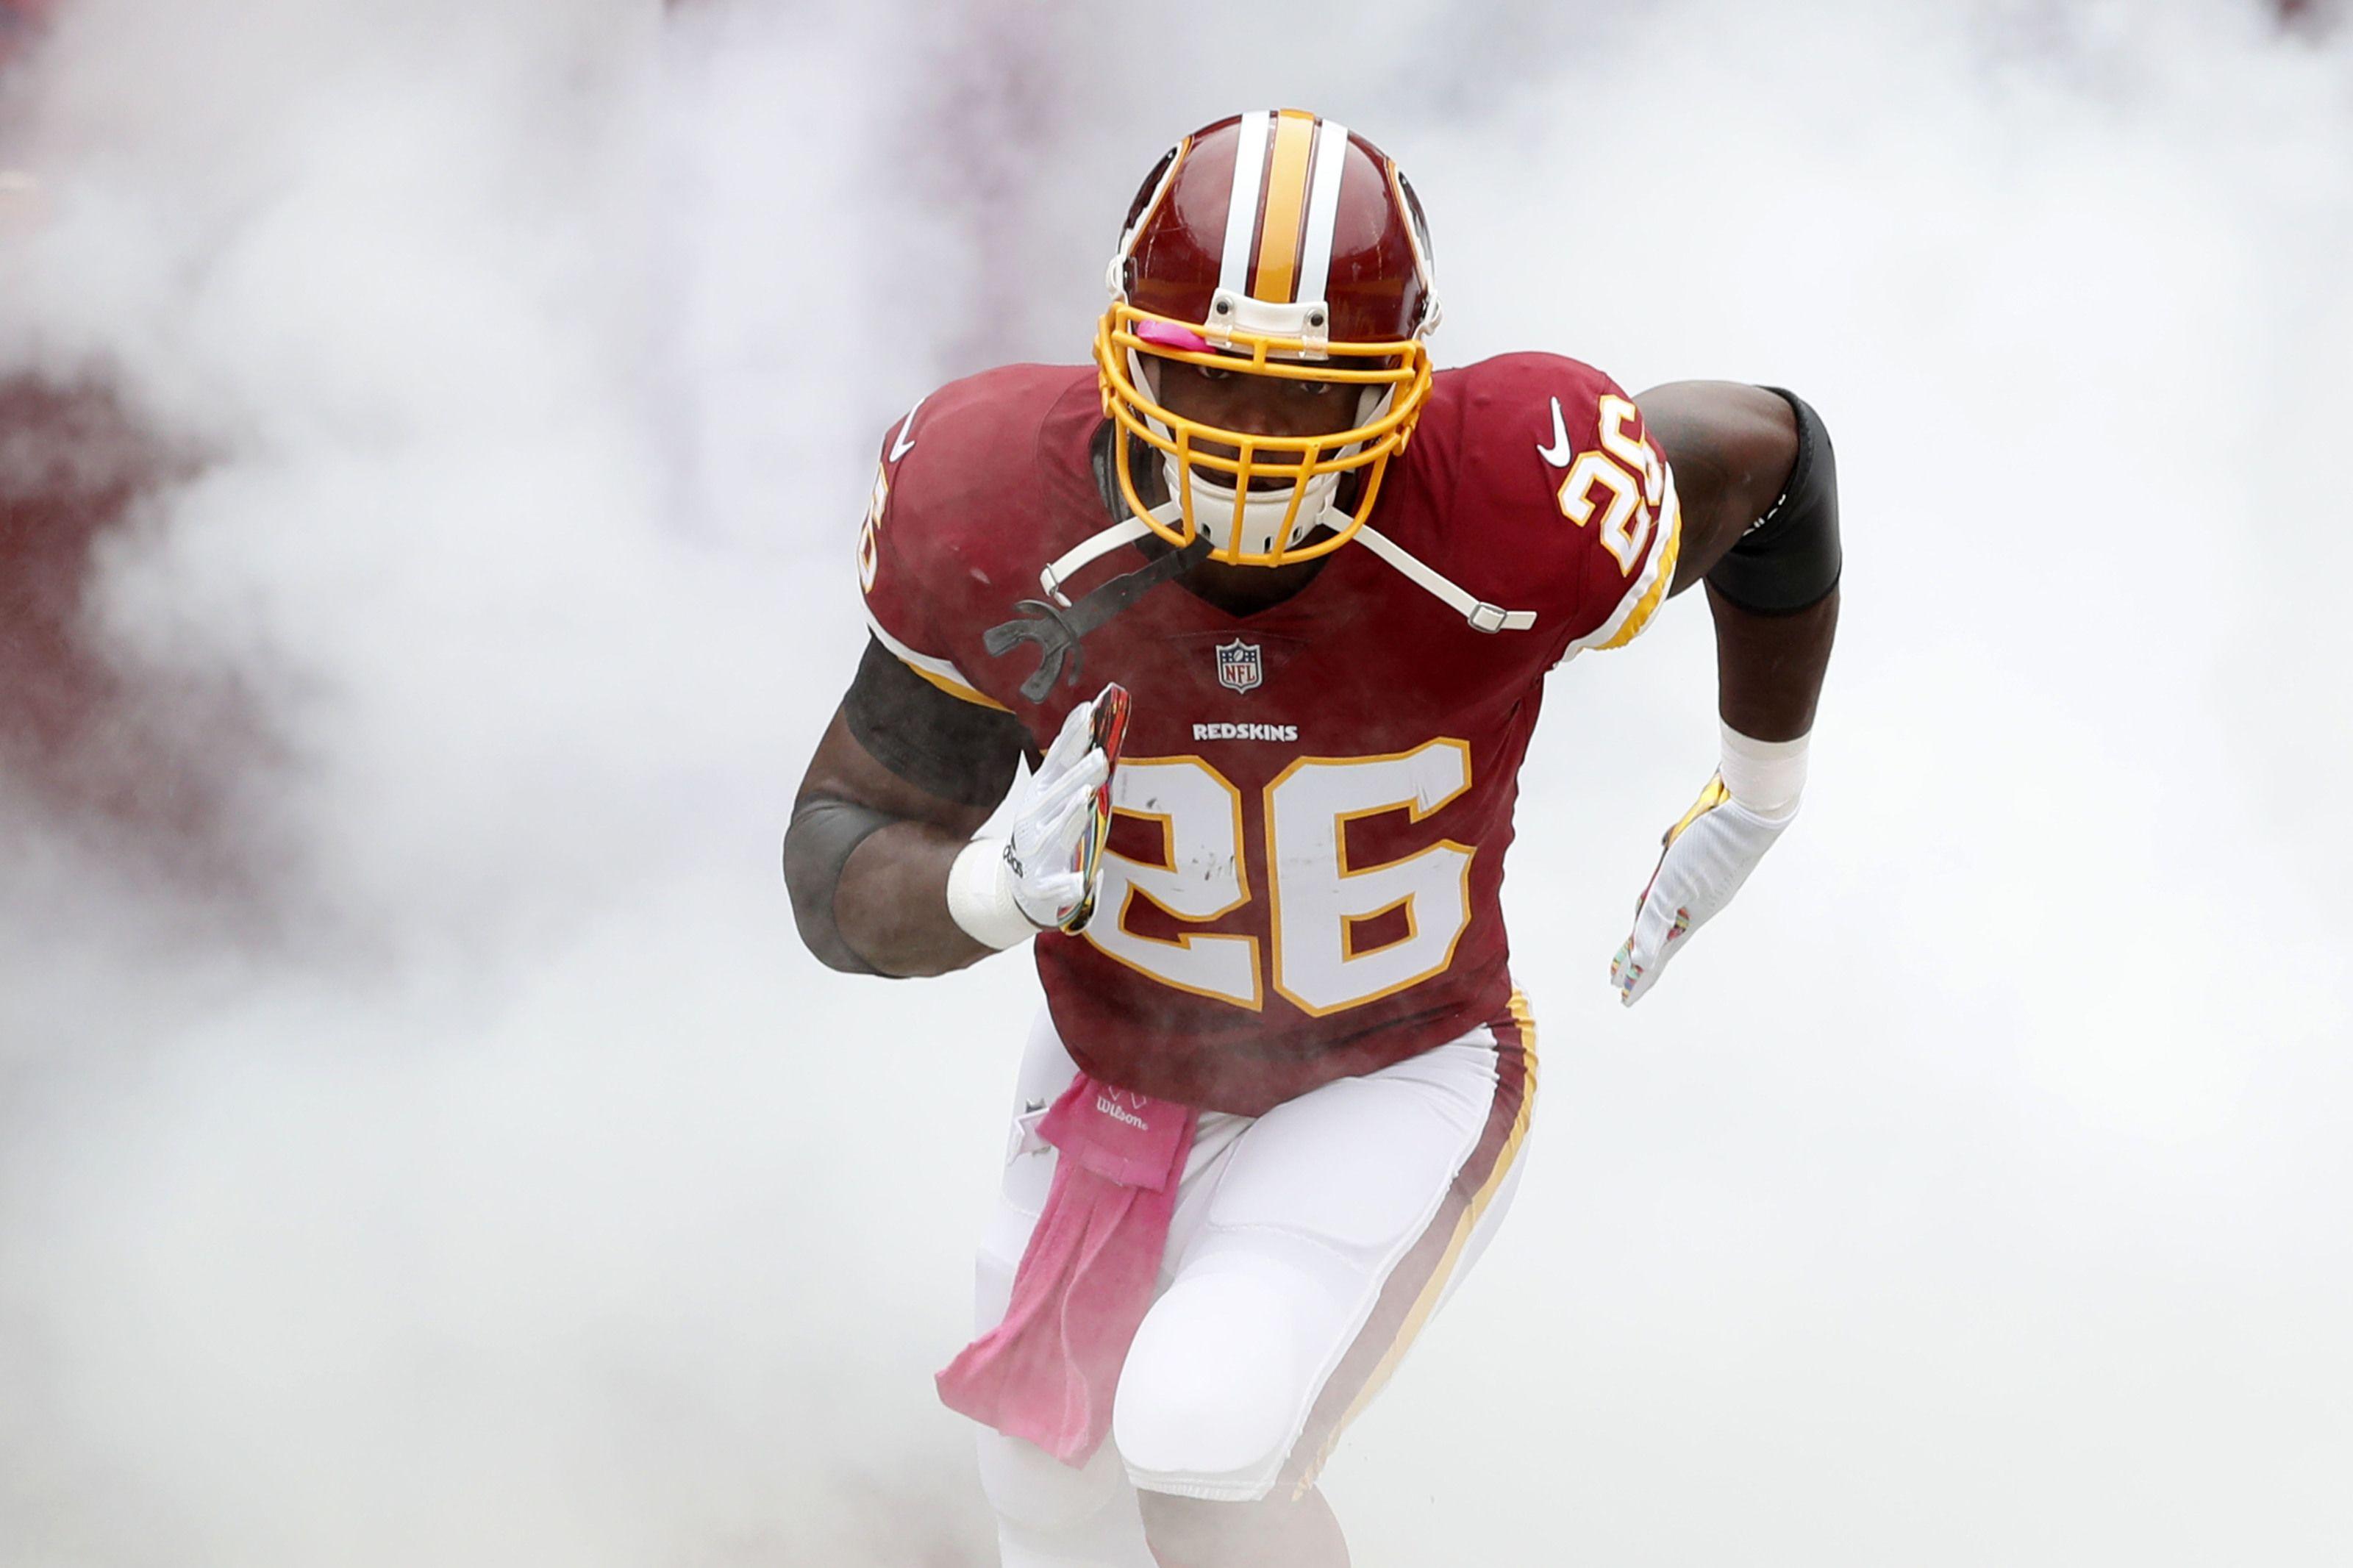 Redskins running back depth is the best it's been in some time